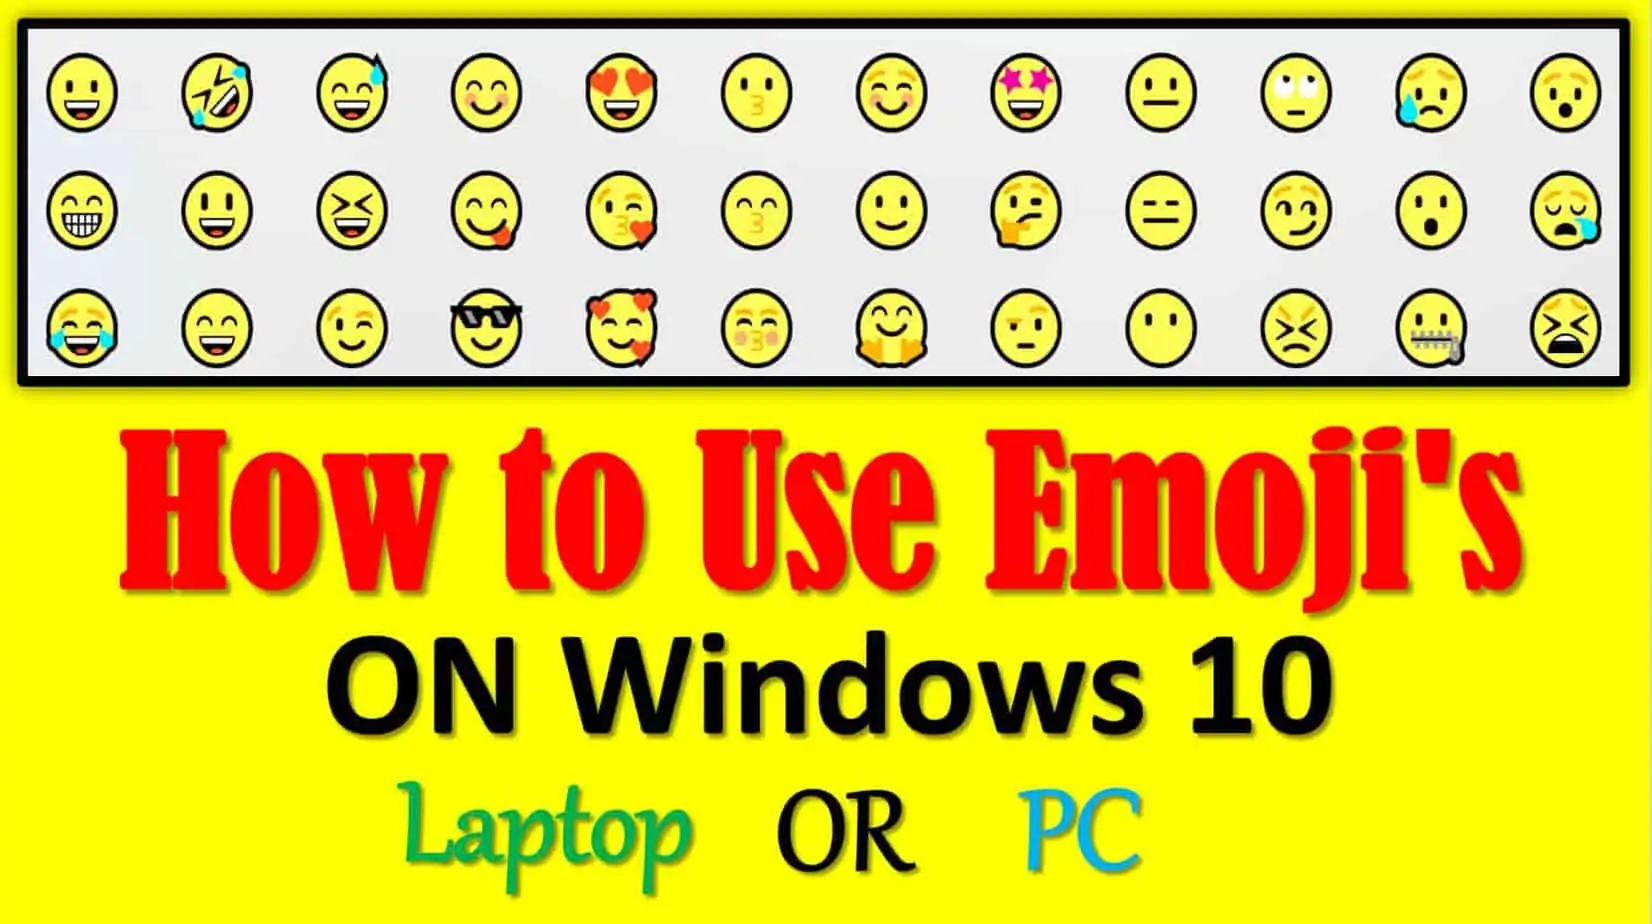 How to use emoji on laptop